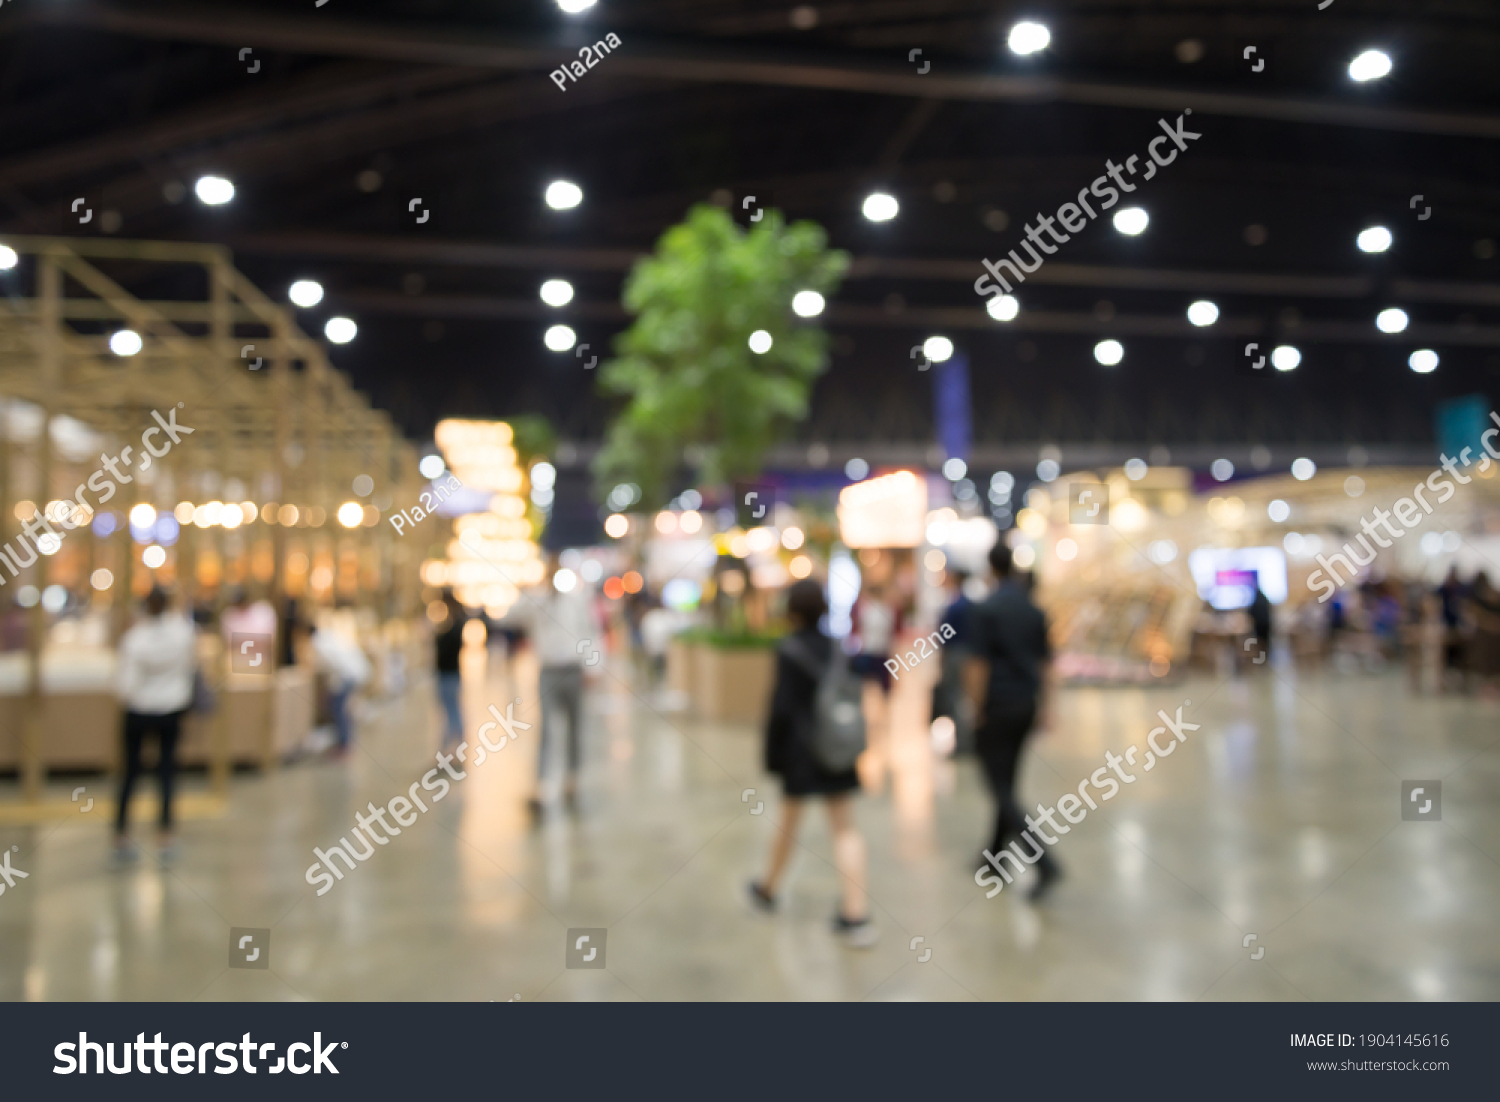 Abstract blur people in exhibition hall event trade show expo background. Large international exhibition, convention center, business marketing and event fair organizer concept. #1904145616